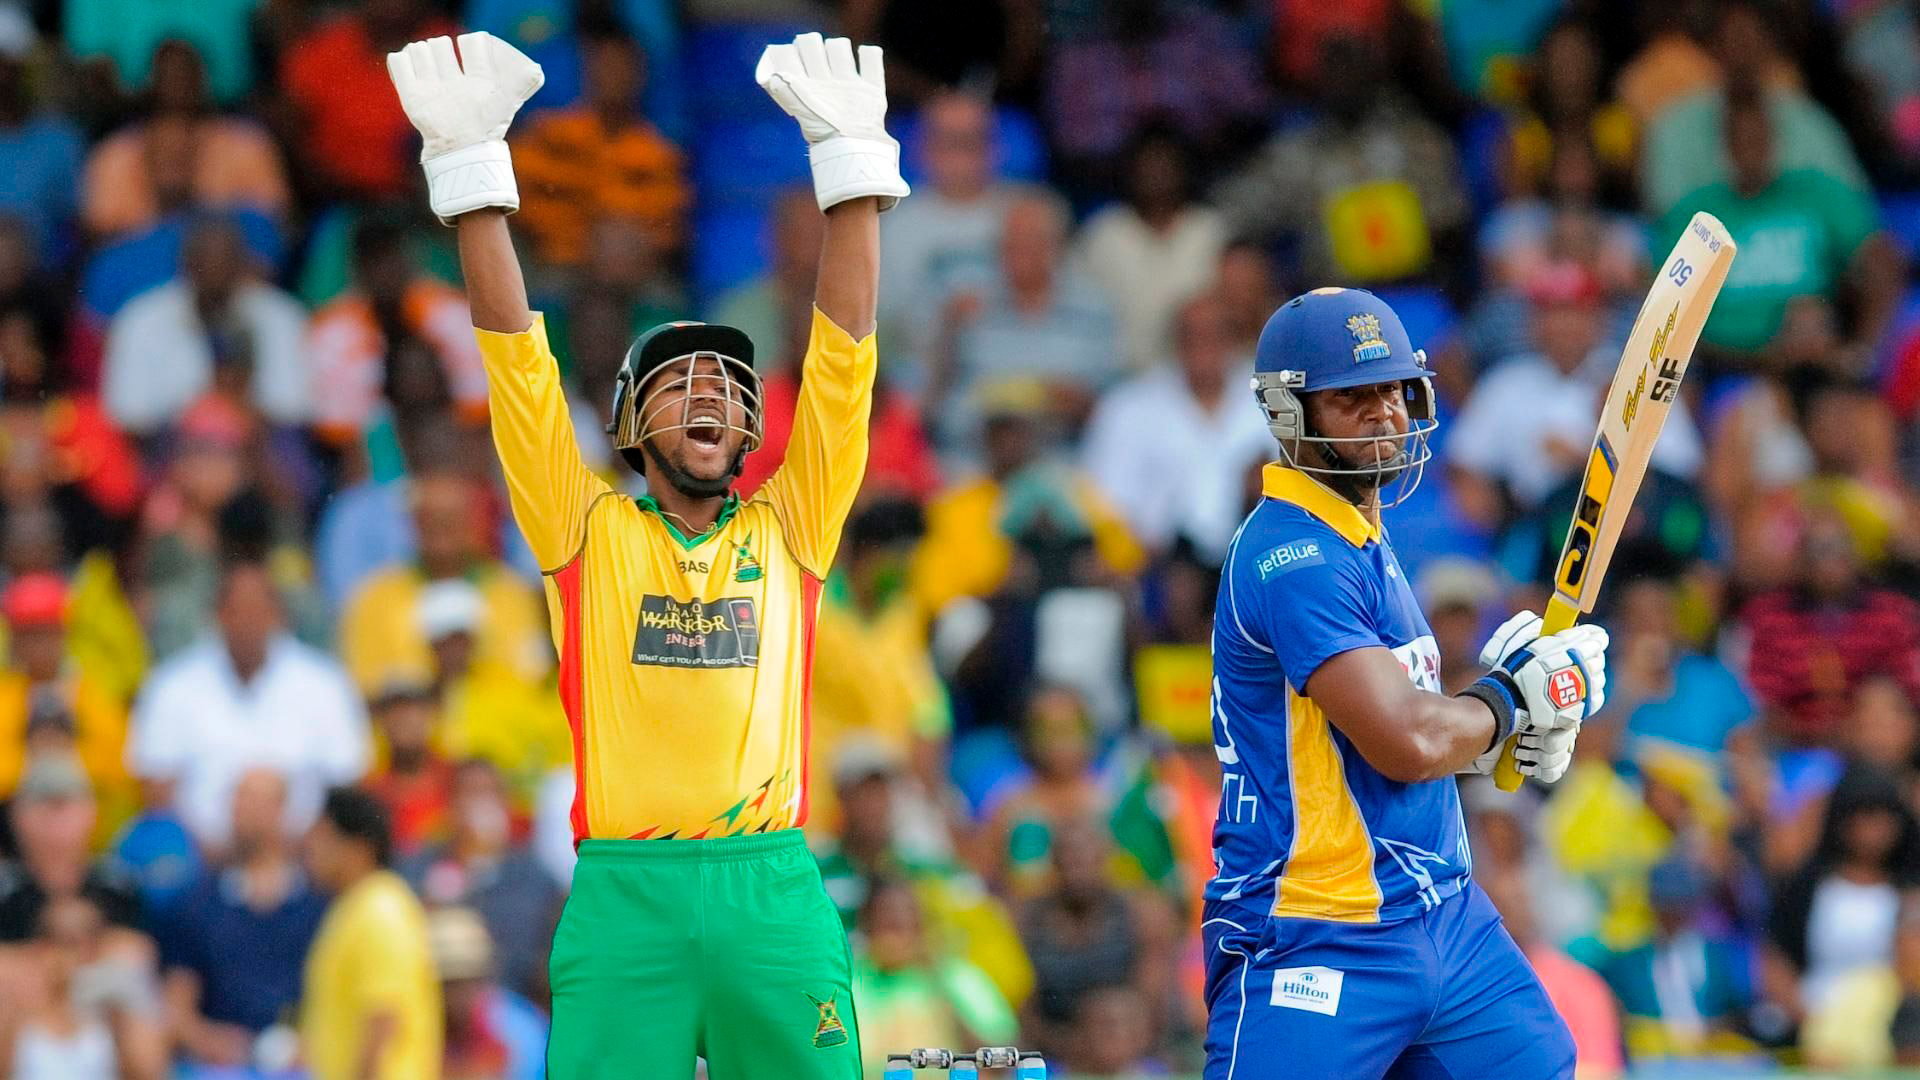 Sportradar forms new agreement with Caribbean Premier League